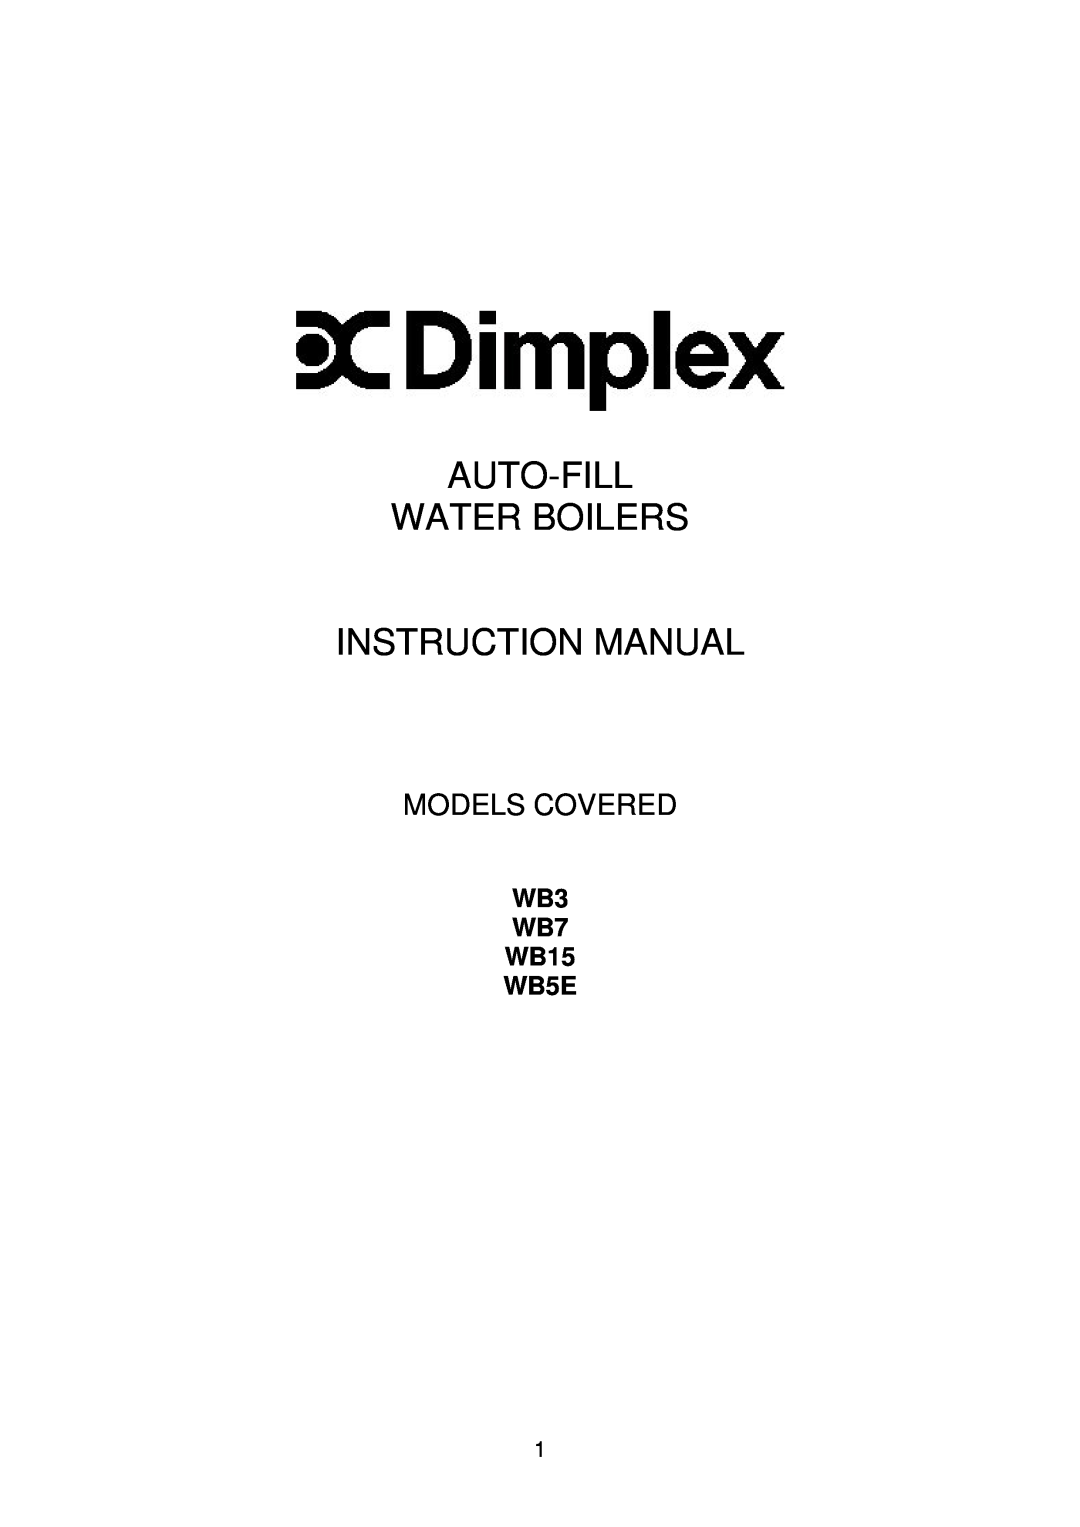 Dimplex WB5E 1 instruction manual Auto-Fill Water Boilers Instruction Manual, Models Covered, WB3 WB7 WB15 WB5E 